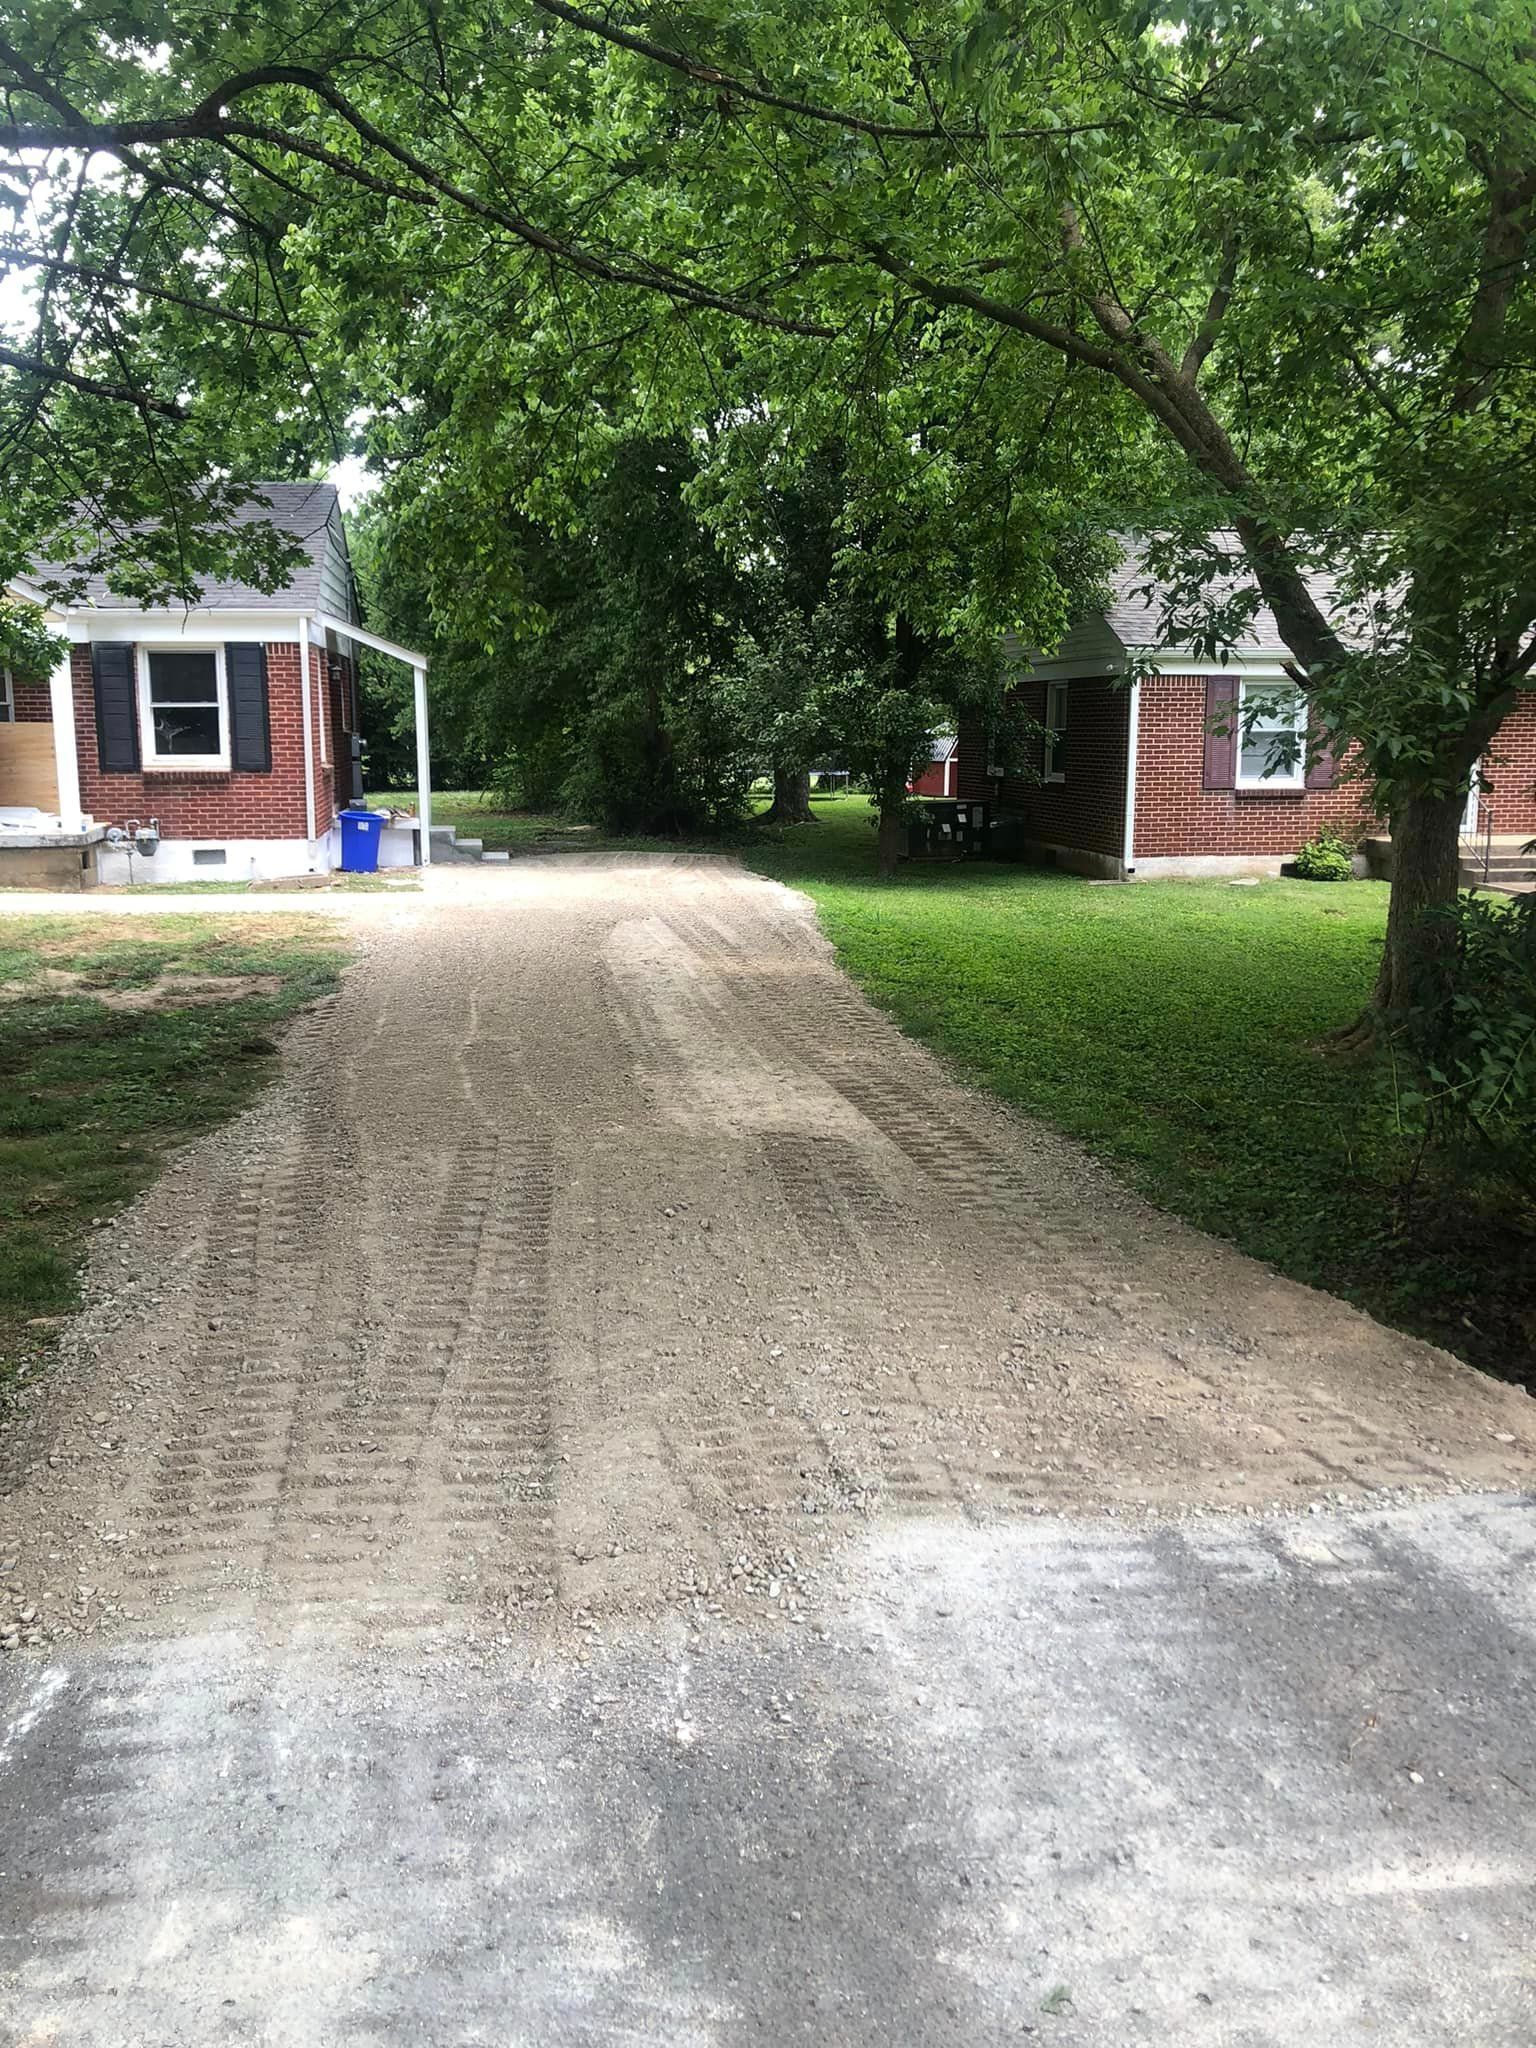 A dirt road leading to a brick house surrounded by trees.